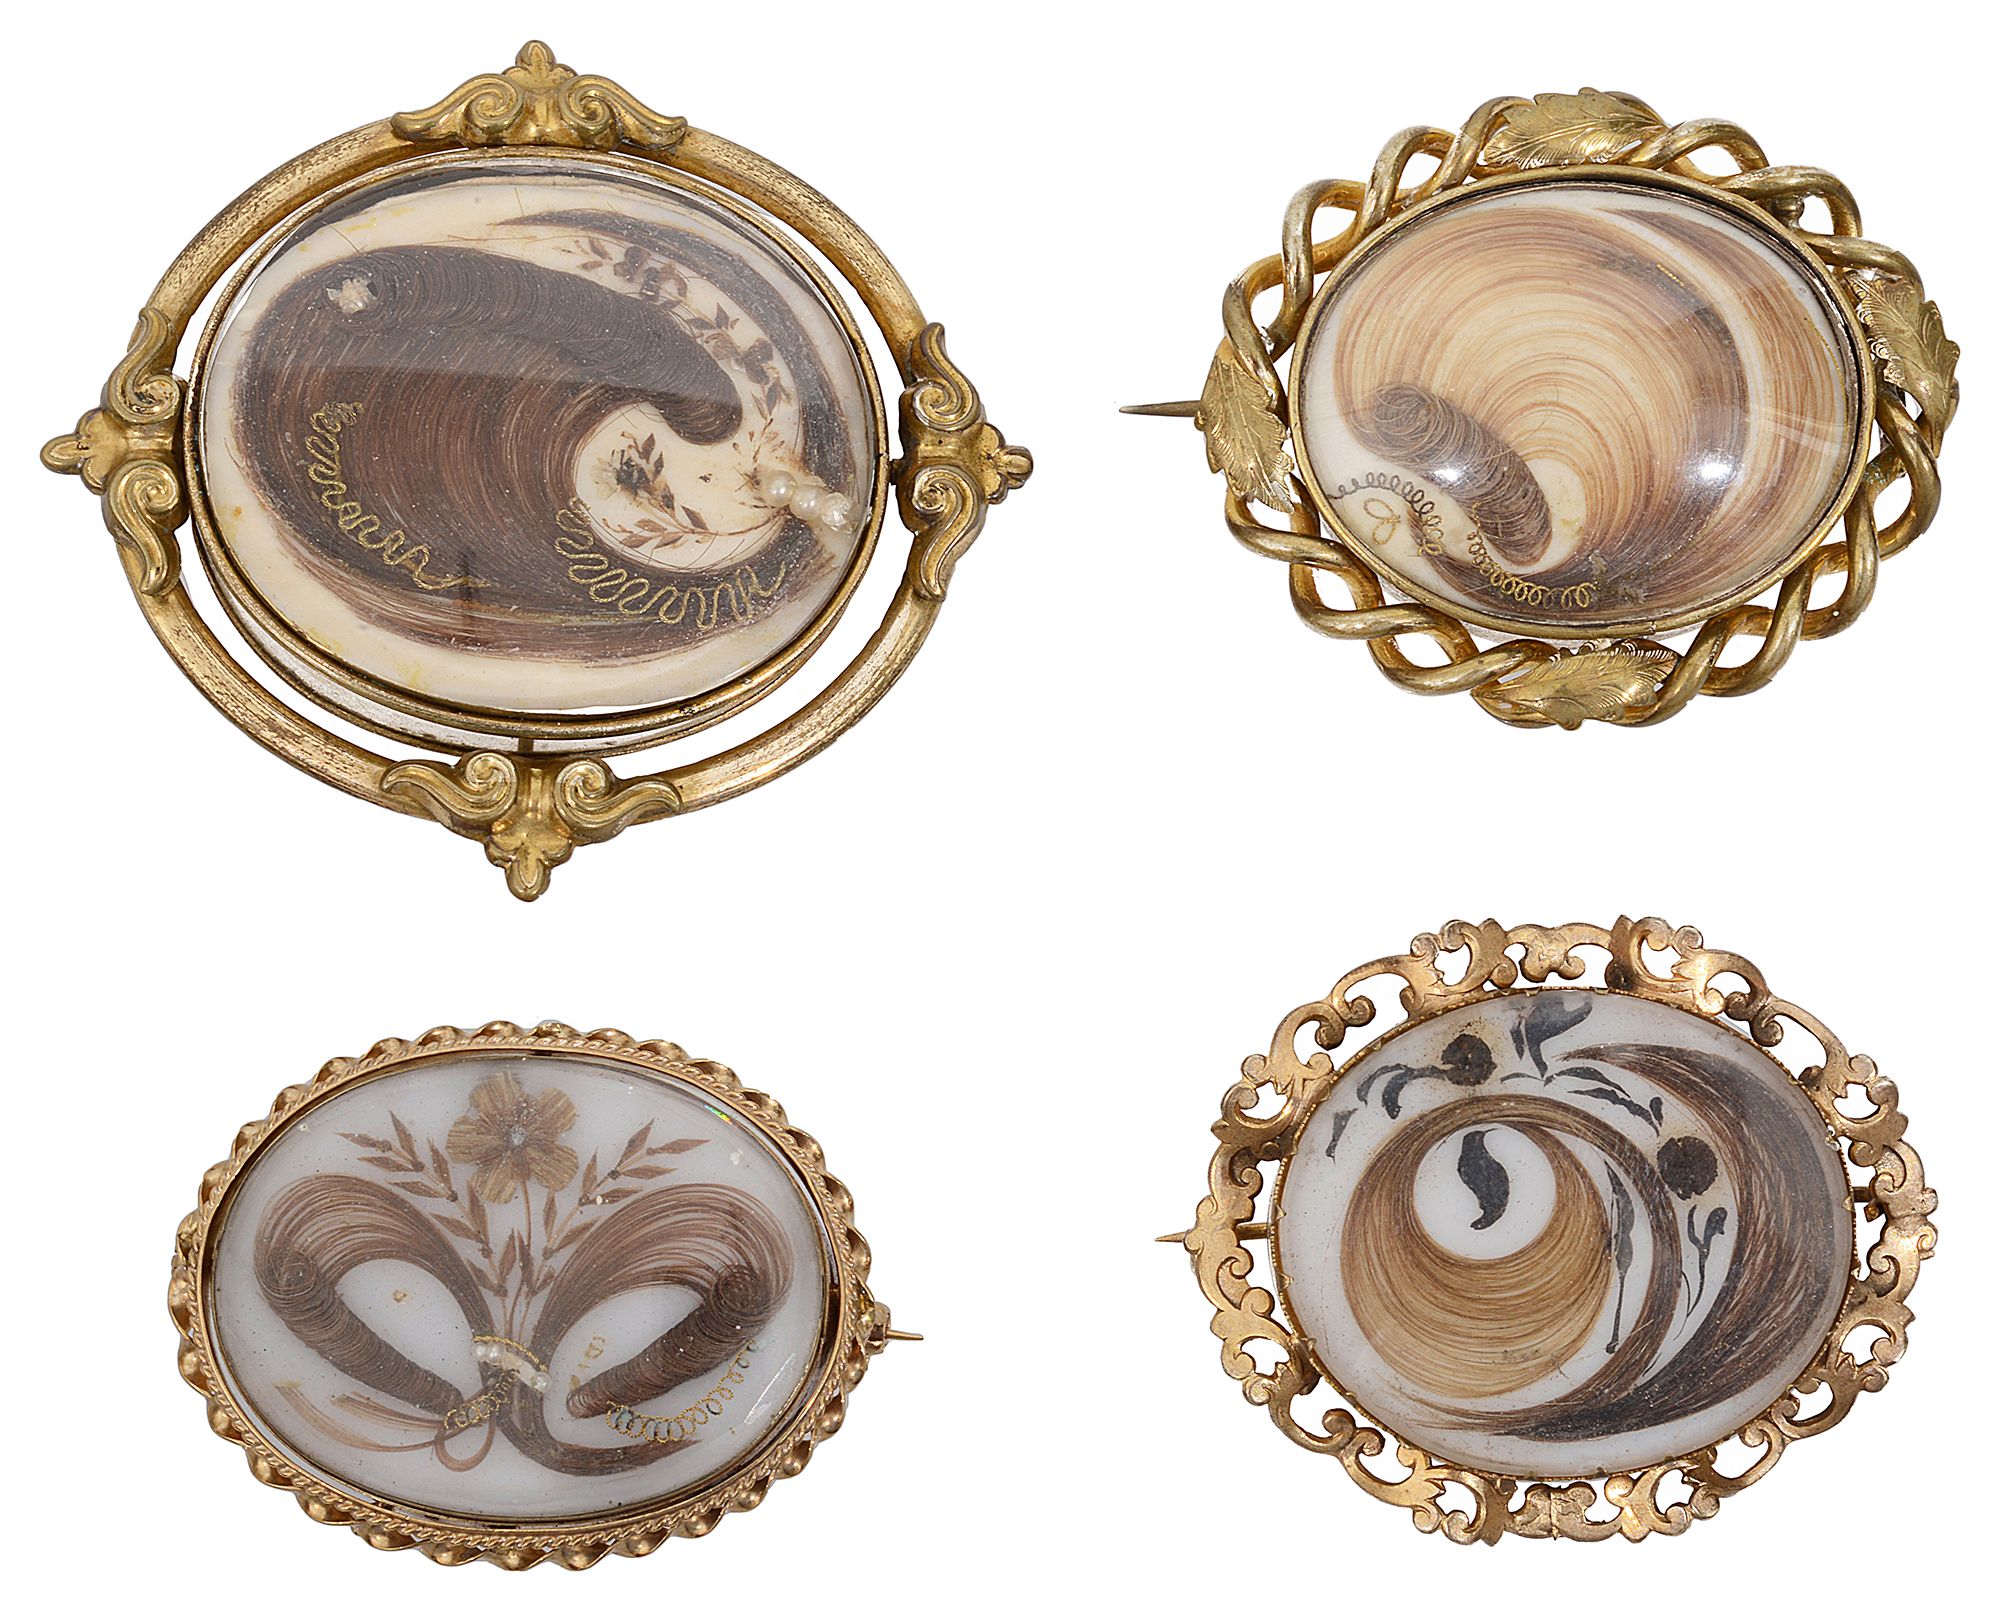 Four 19th century oval memorial locket brooches